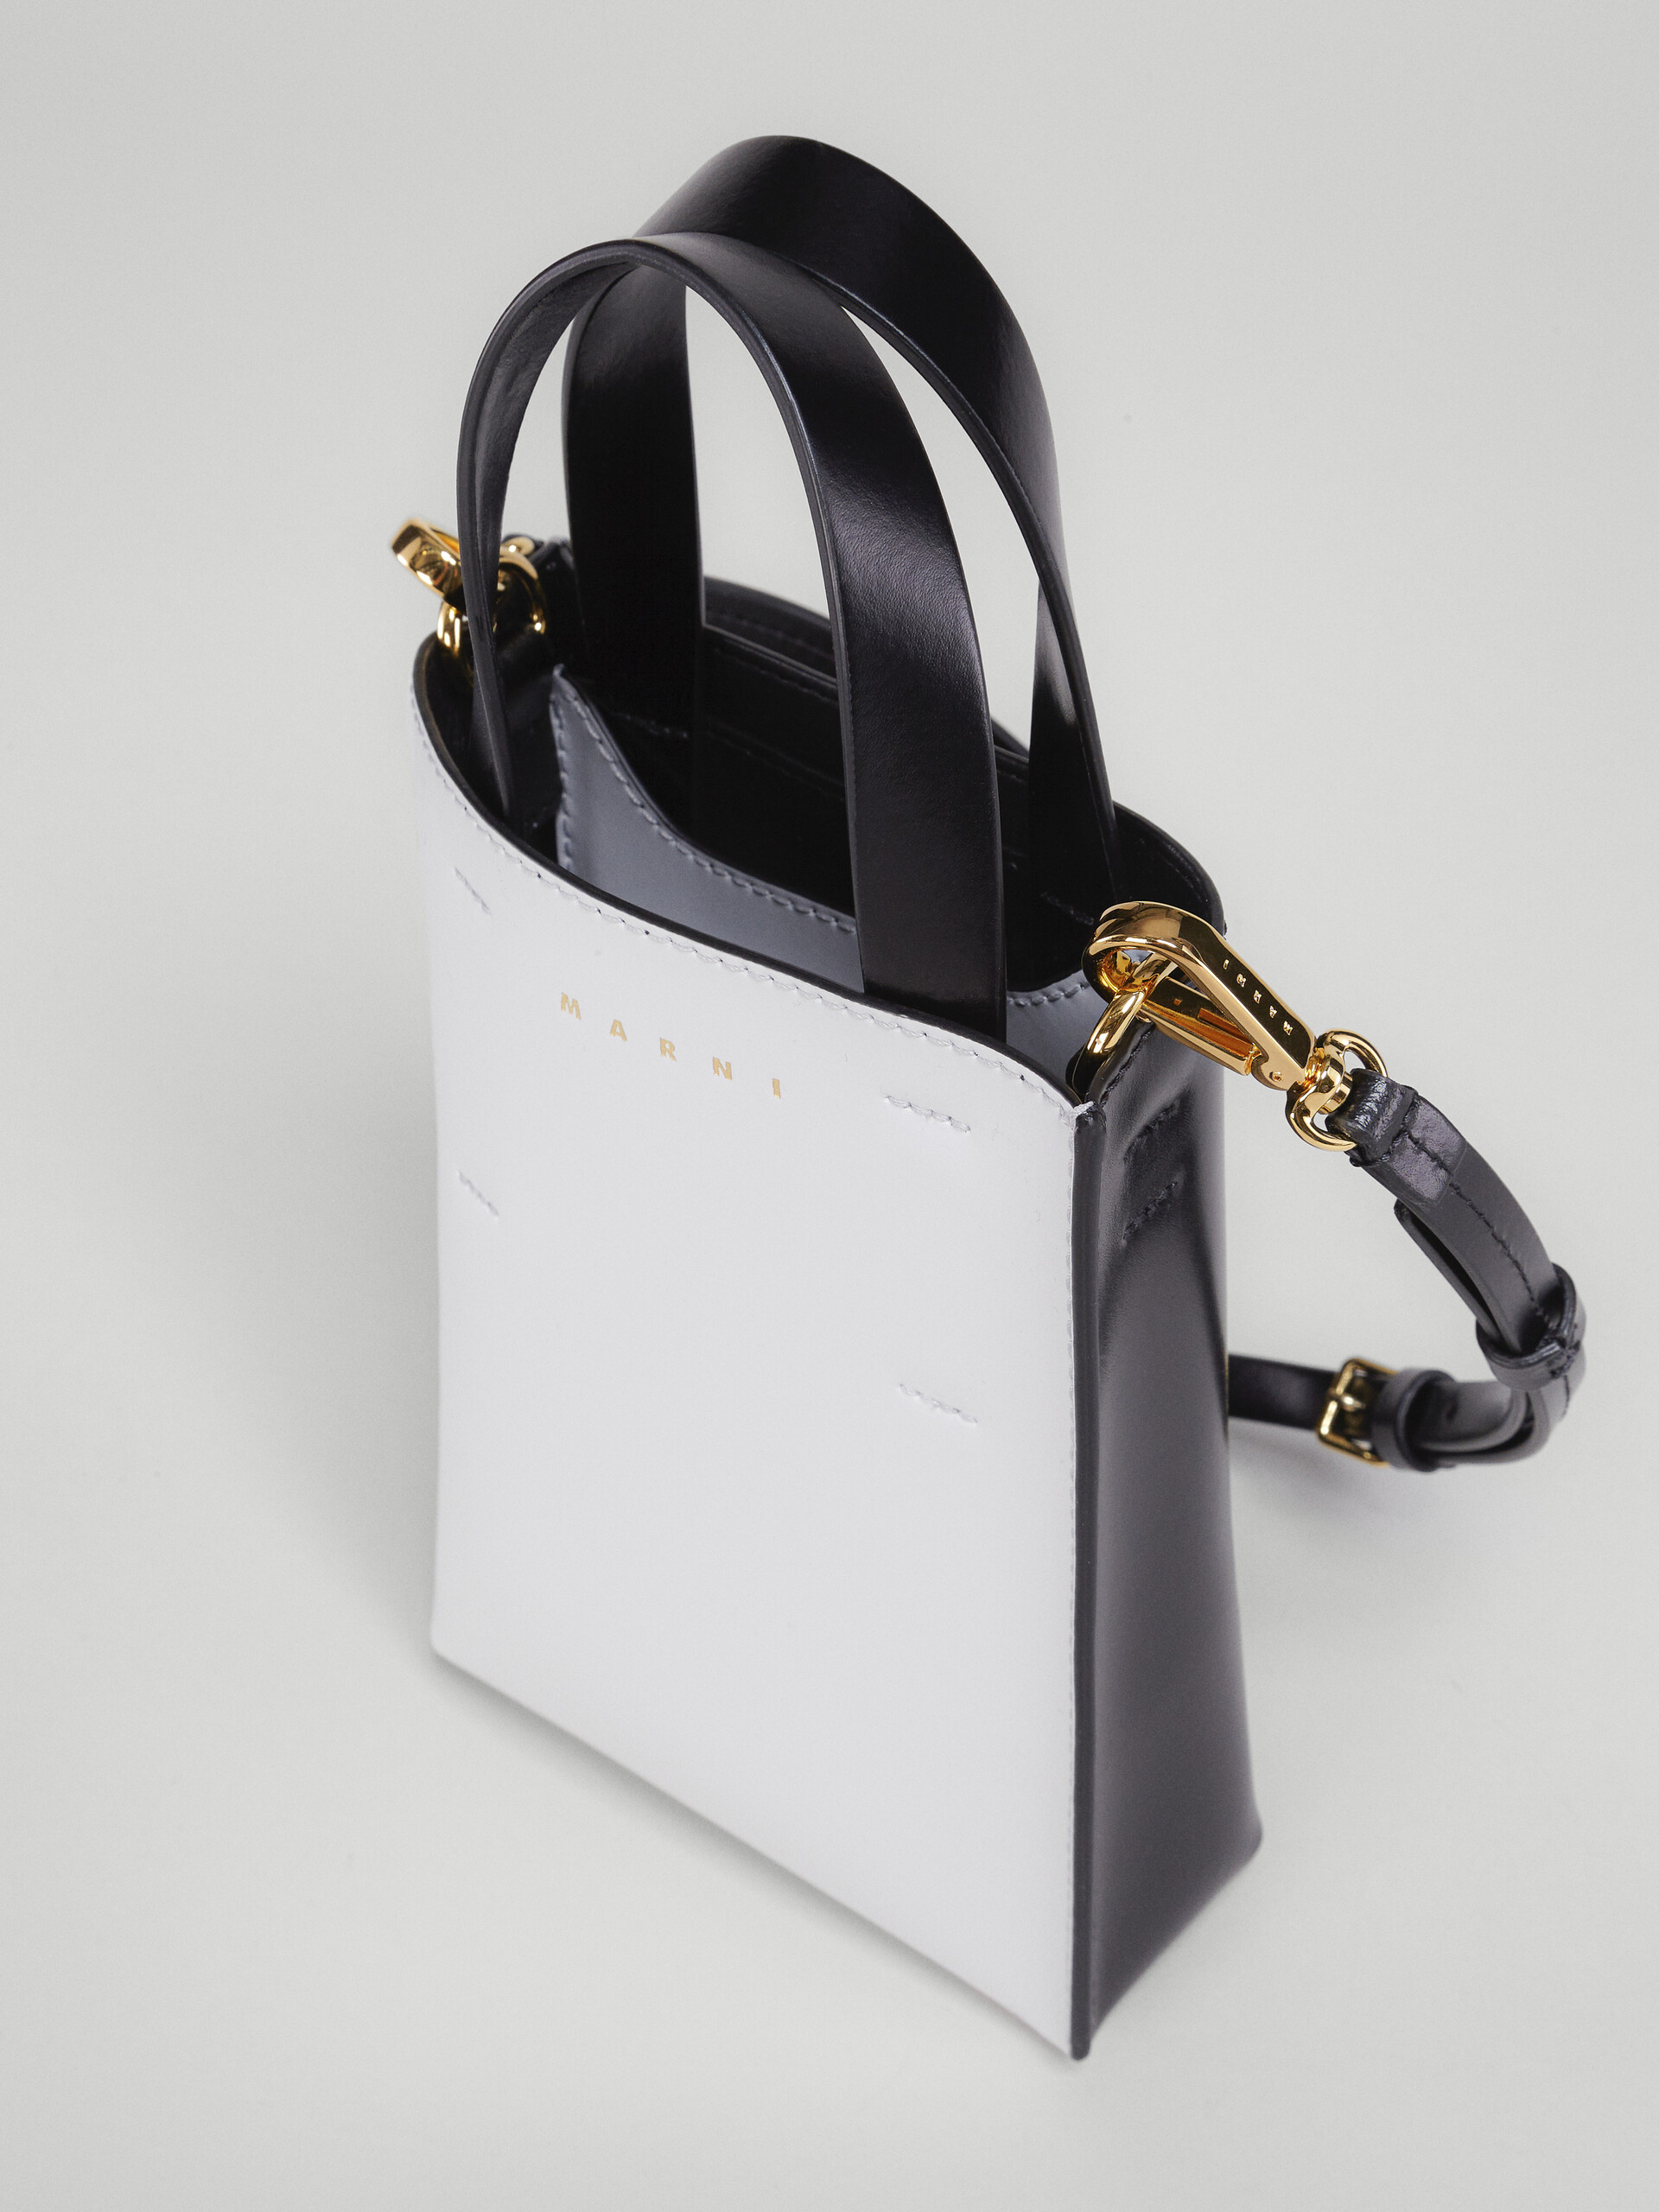 MUSEO nano bag in white and black leather - Shopping Bags - Image 5